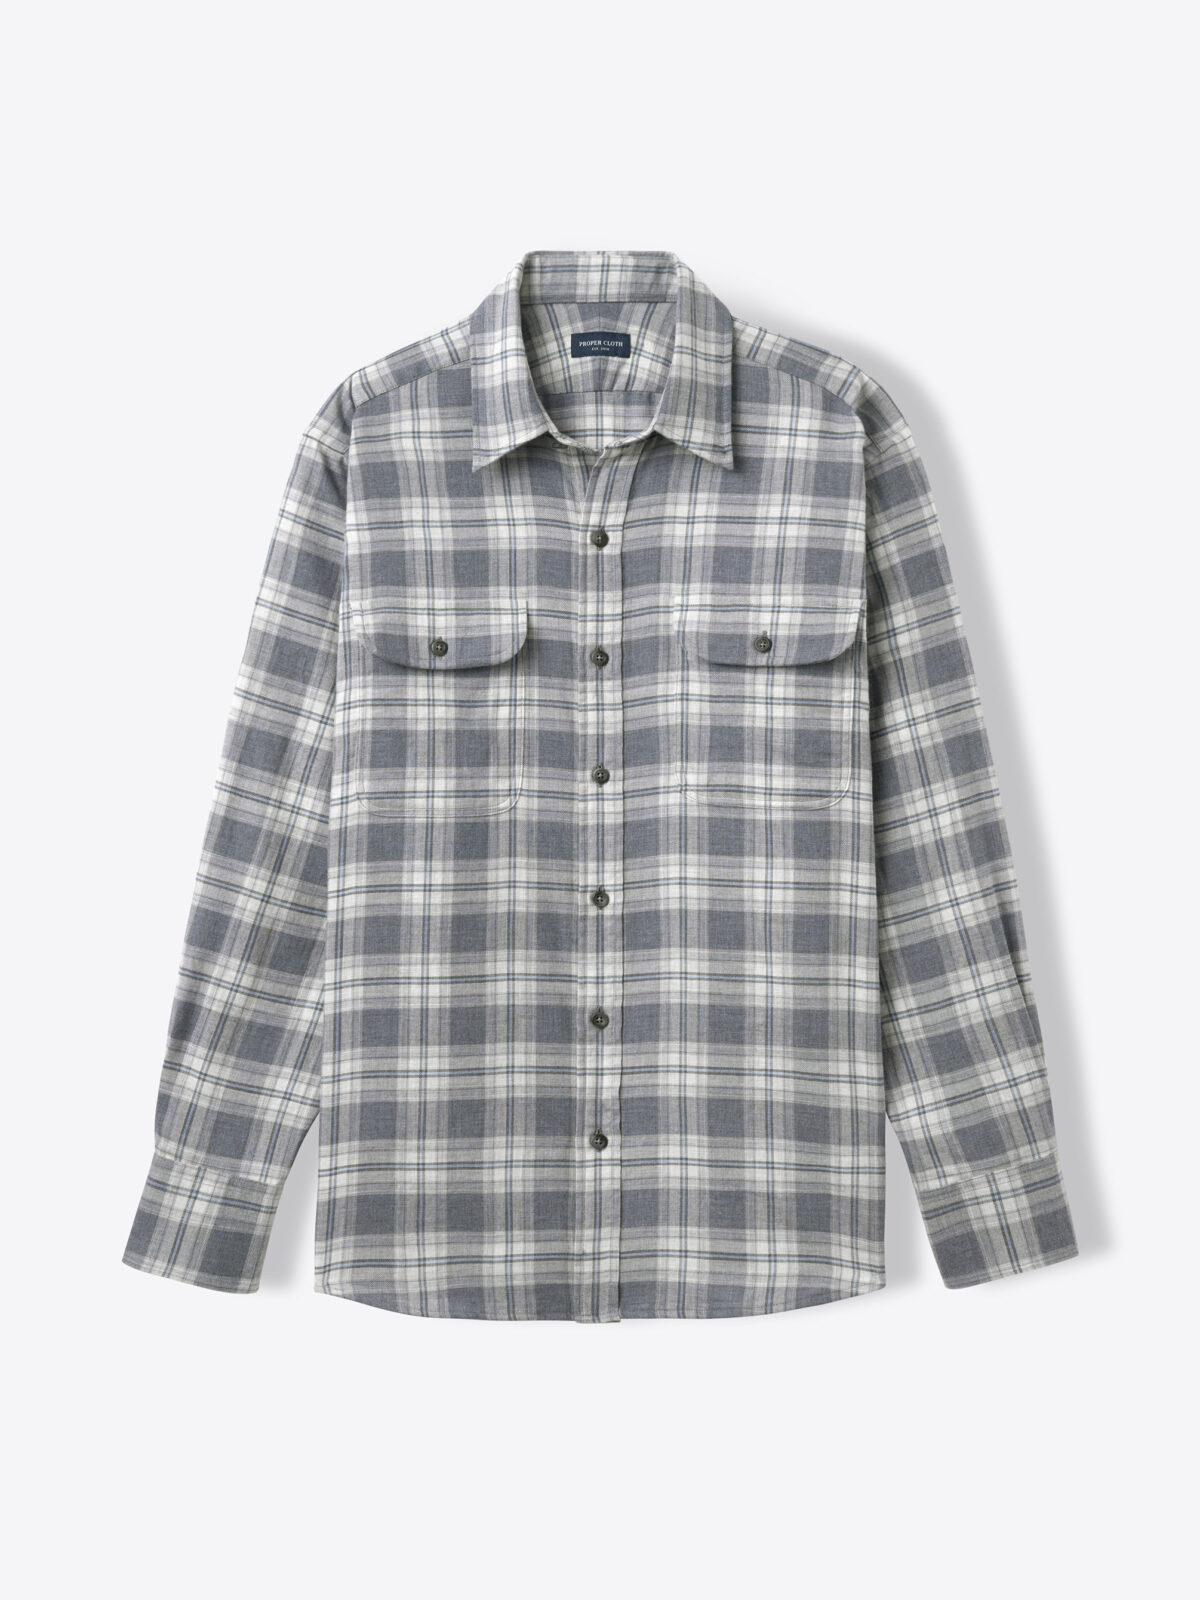 How to Style Plaid Shirt for All Seasons